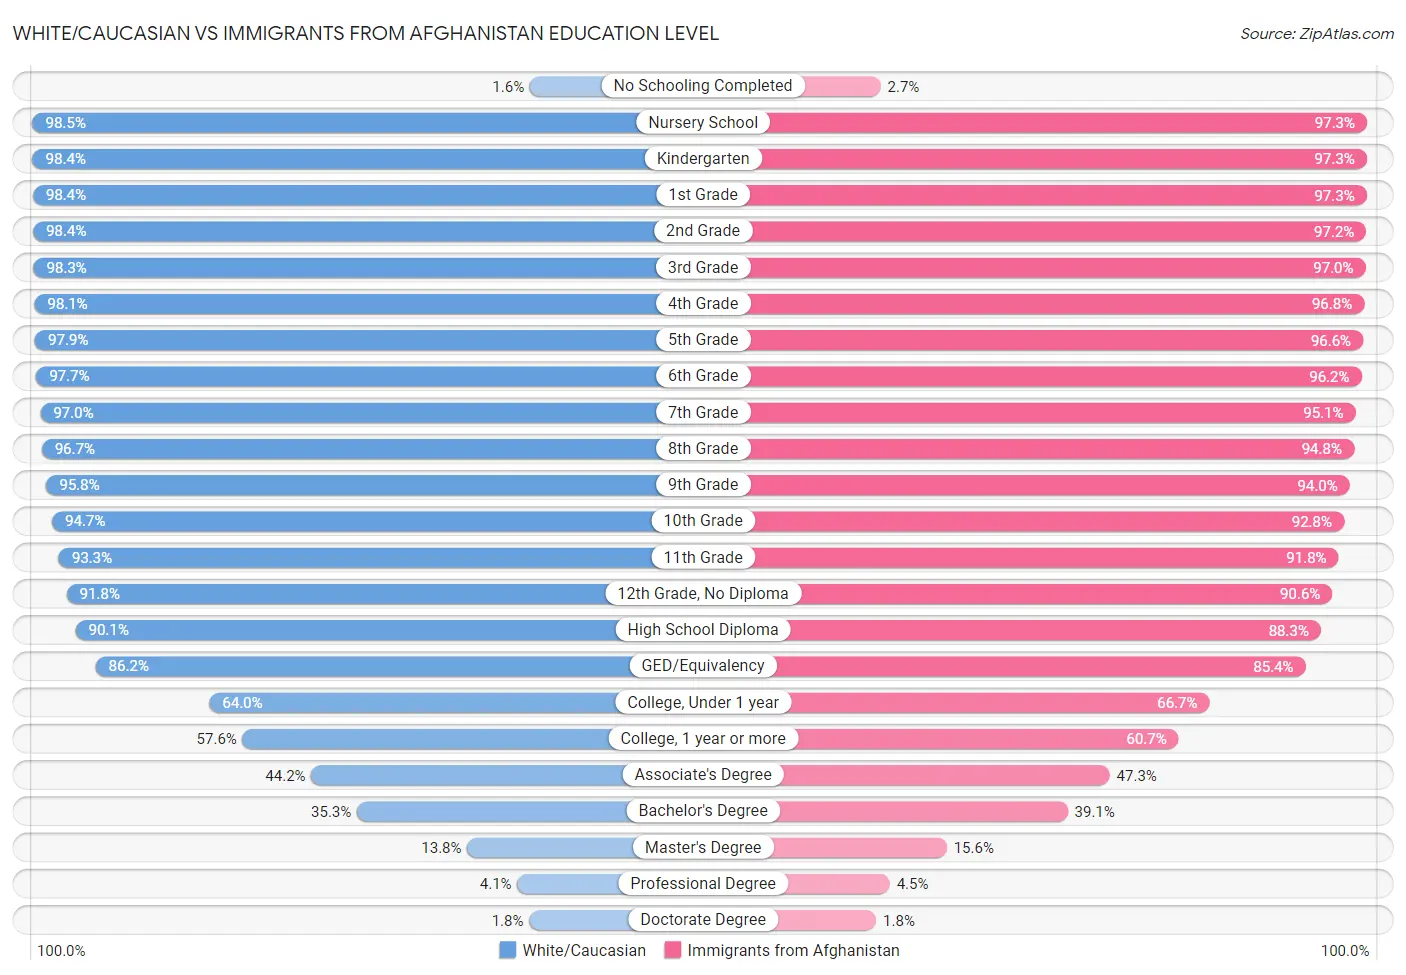 White/Caucasian vs Immigrants from Afghanistan Education Level